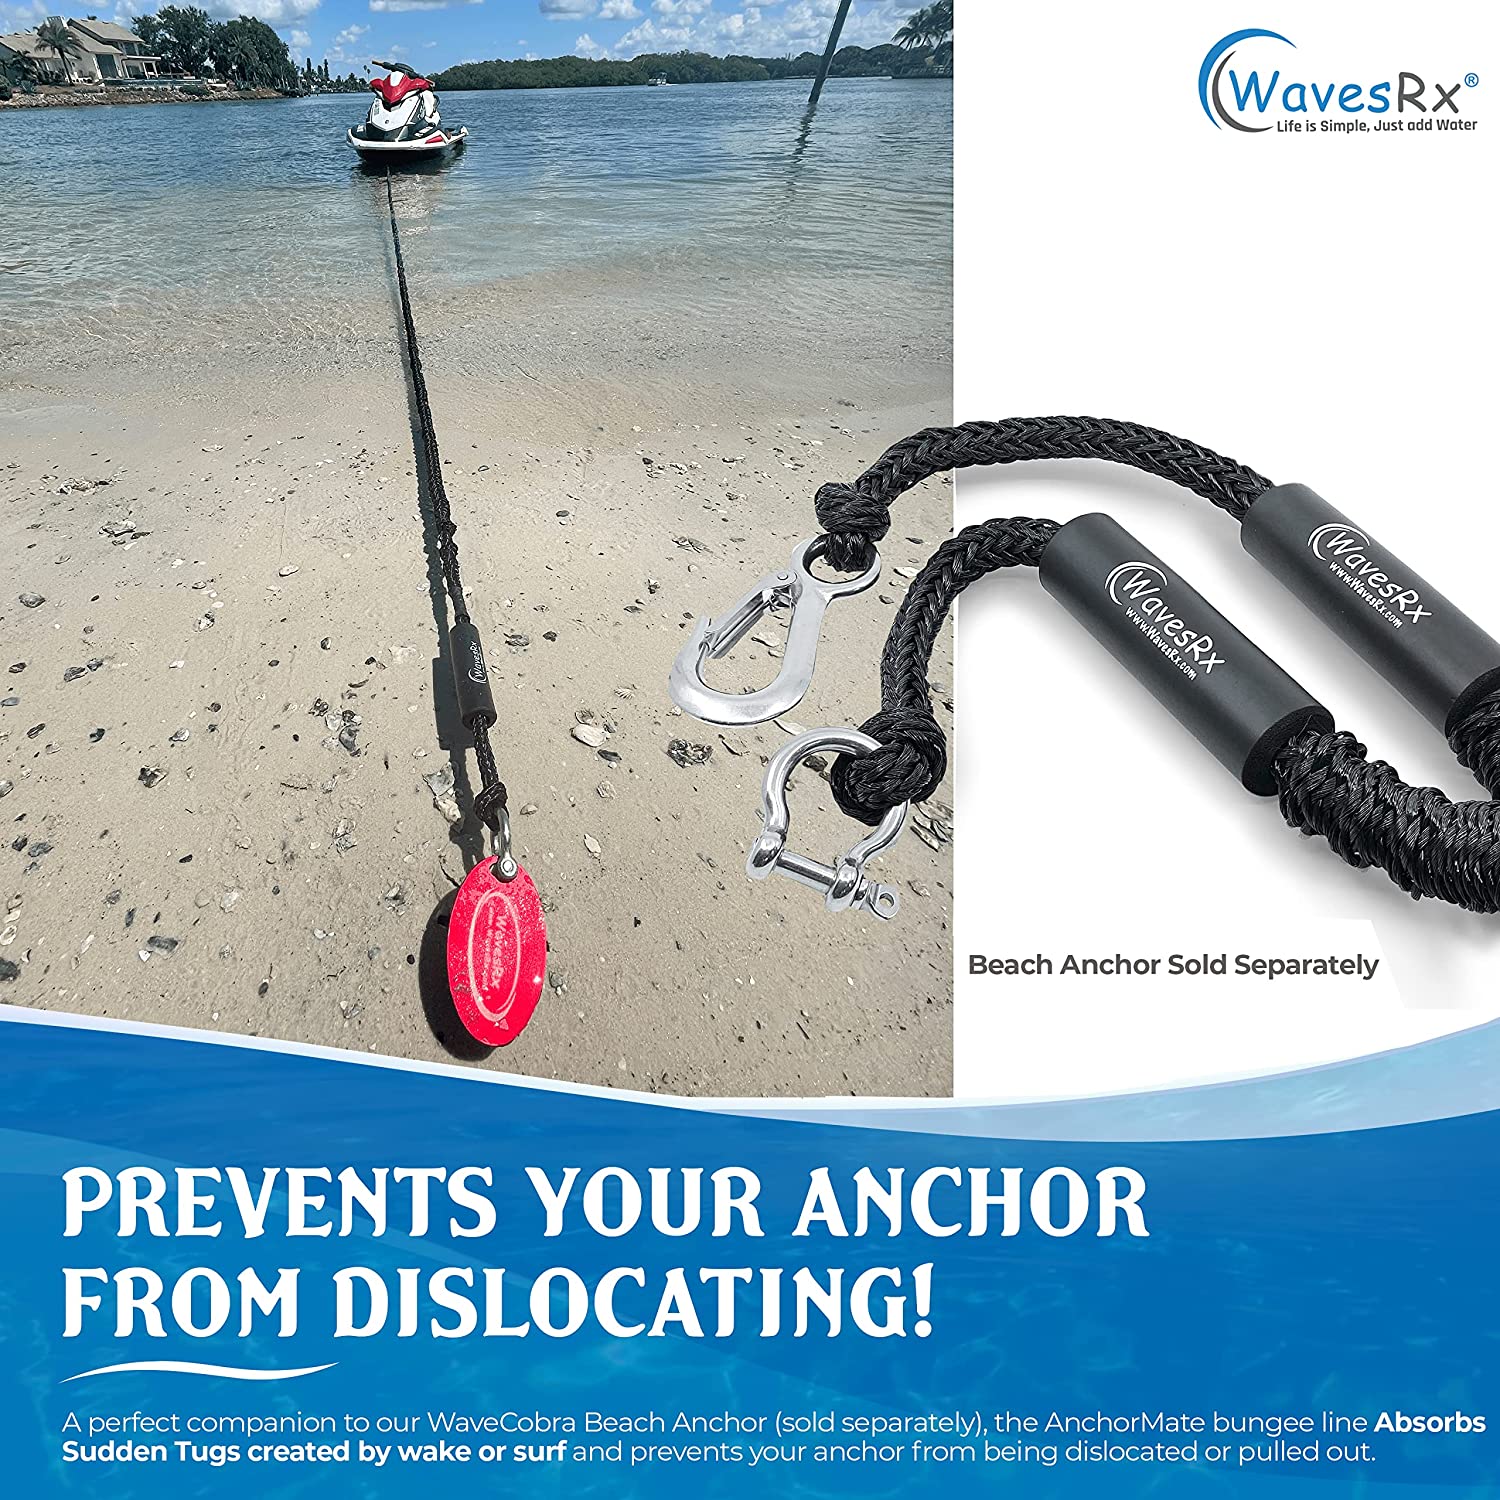 Wavesrx 7'-25' Anchormate Bungee Line | Safer Anchoring for Jet Skis & PWCs | Elastic Rope Extends to Absorb Wake Tugs and Keep Anchor from